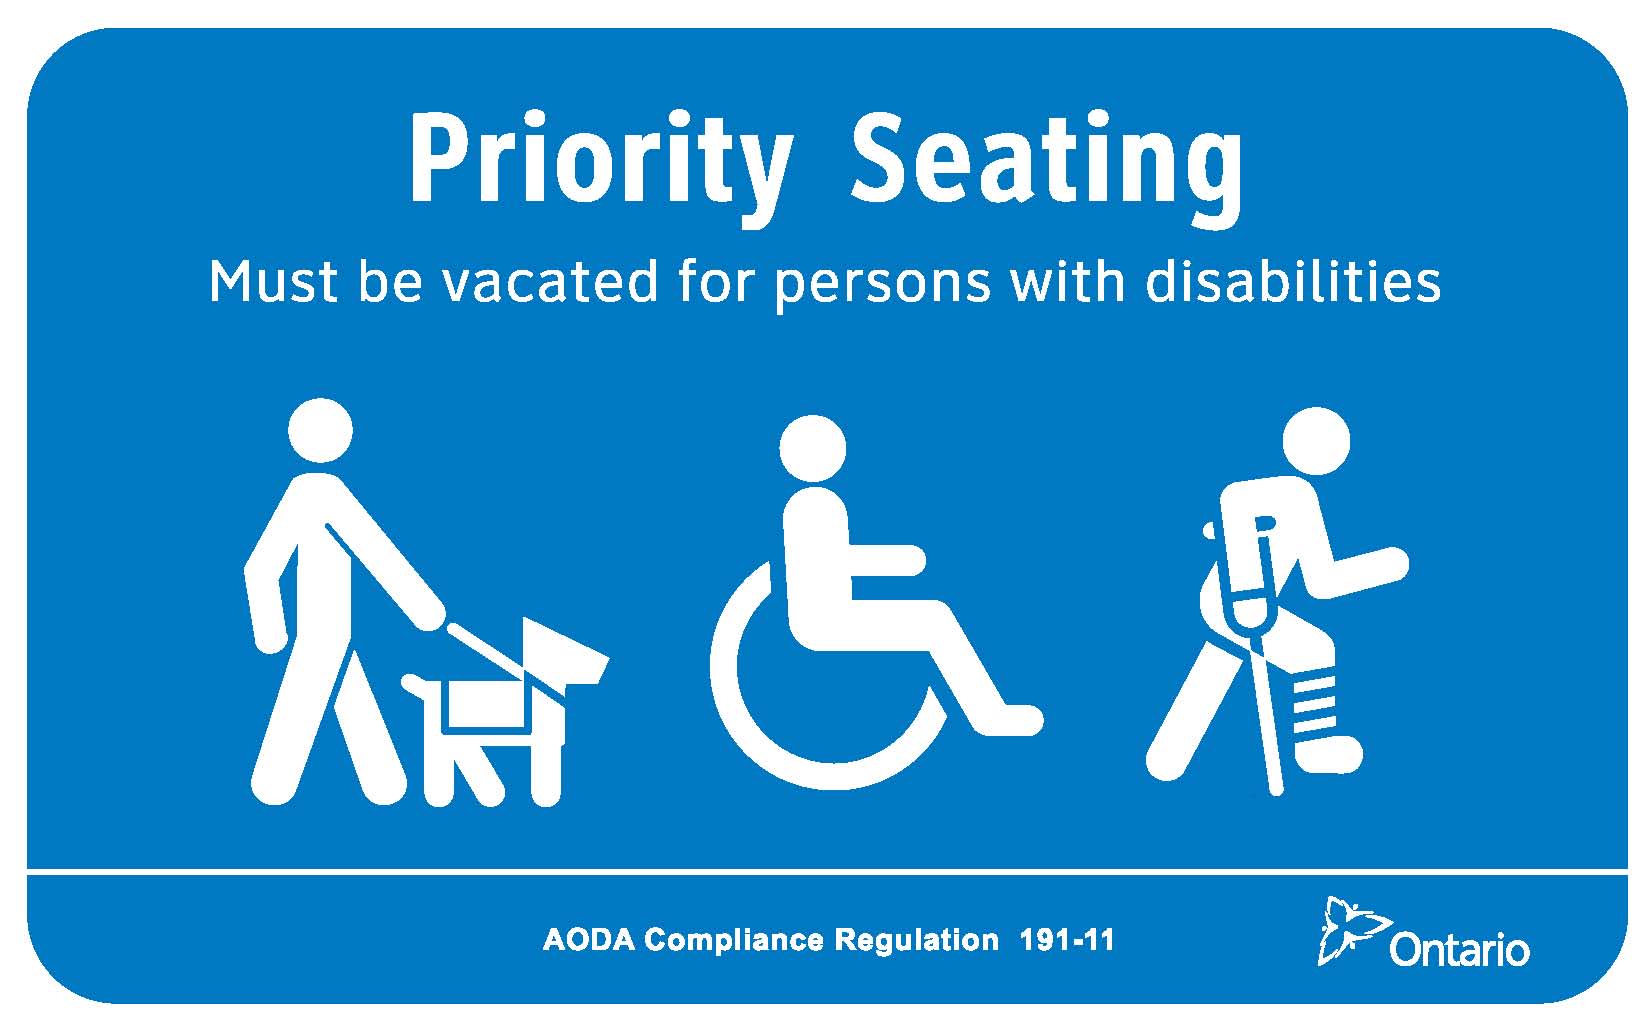 Priority Seating sign with words, Must be vacated for persons with disabilities